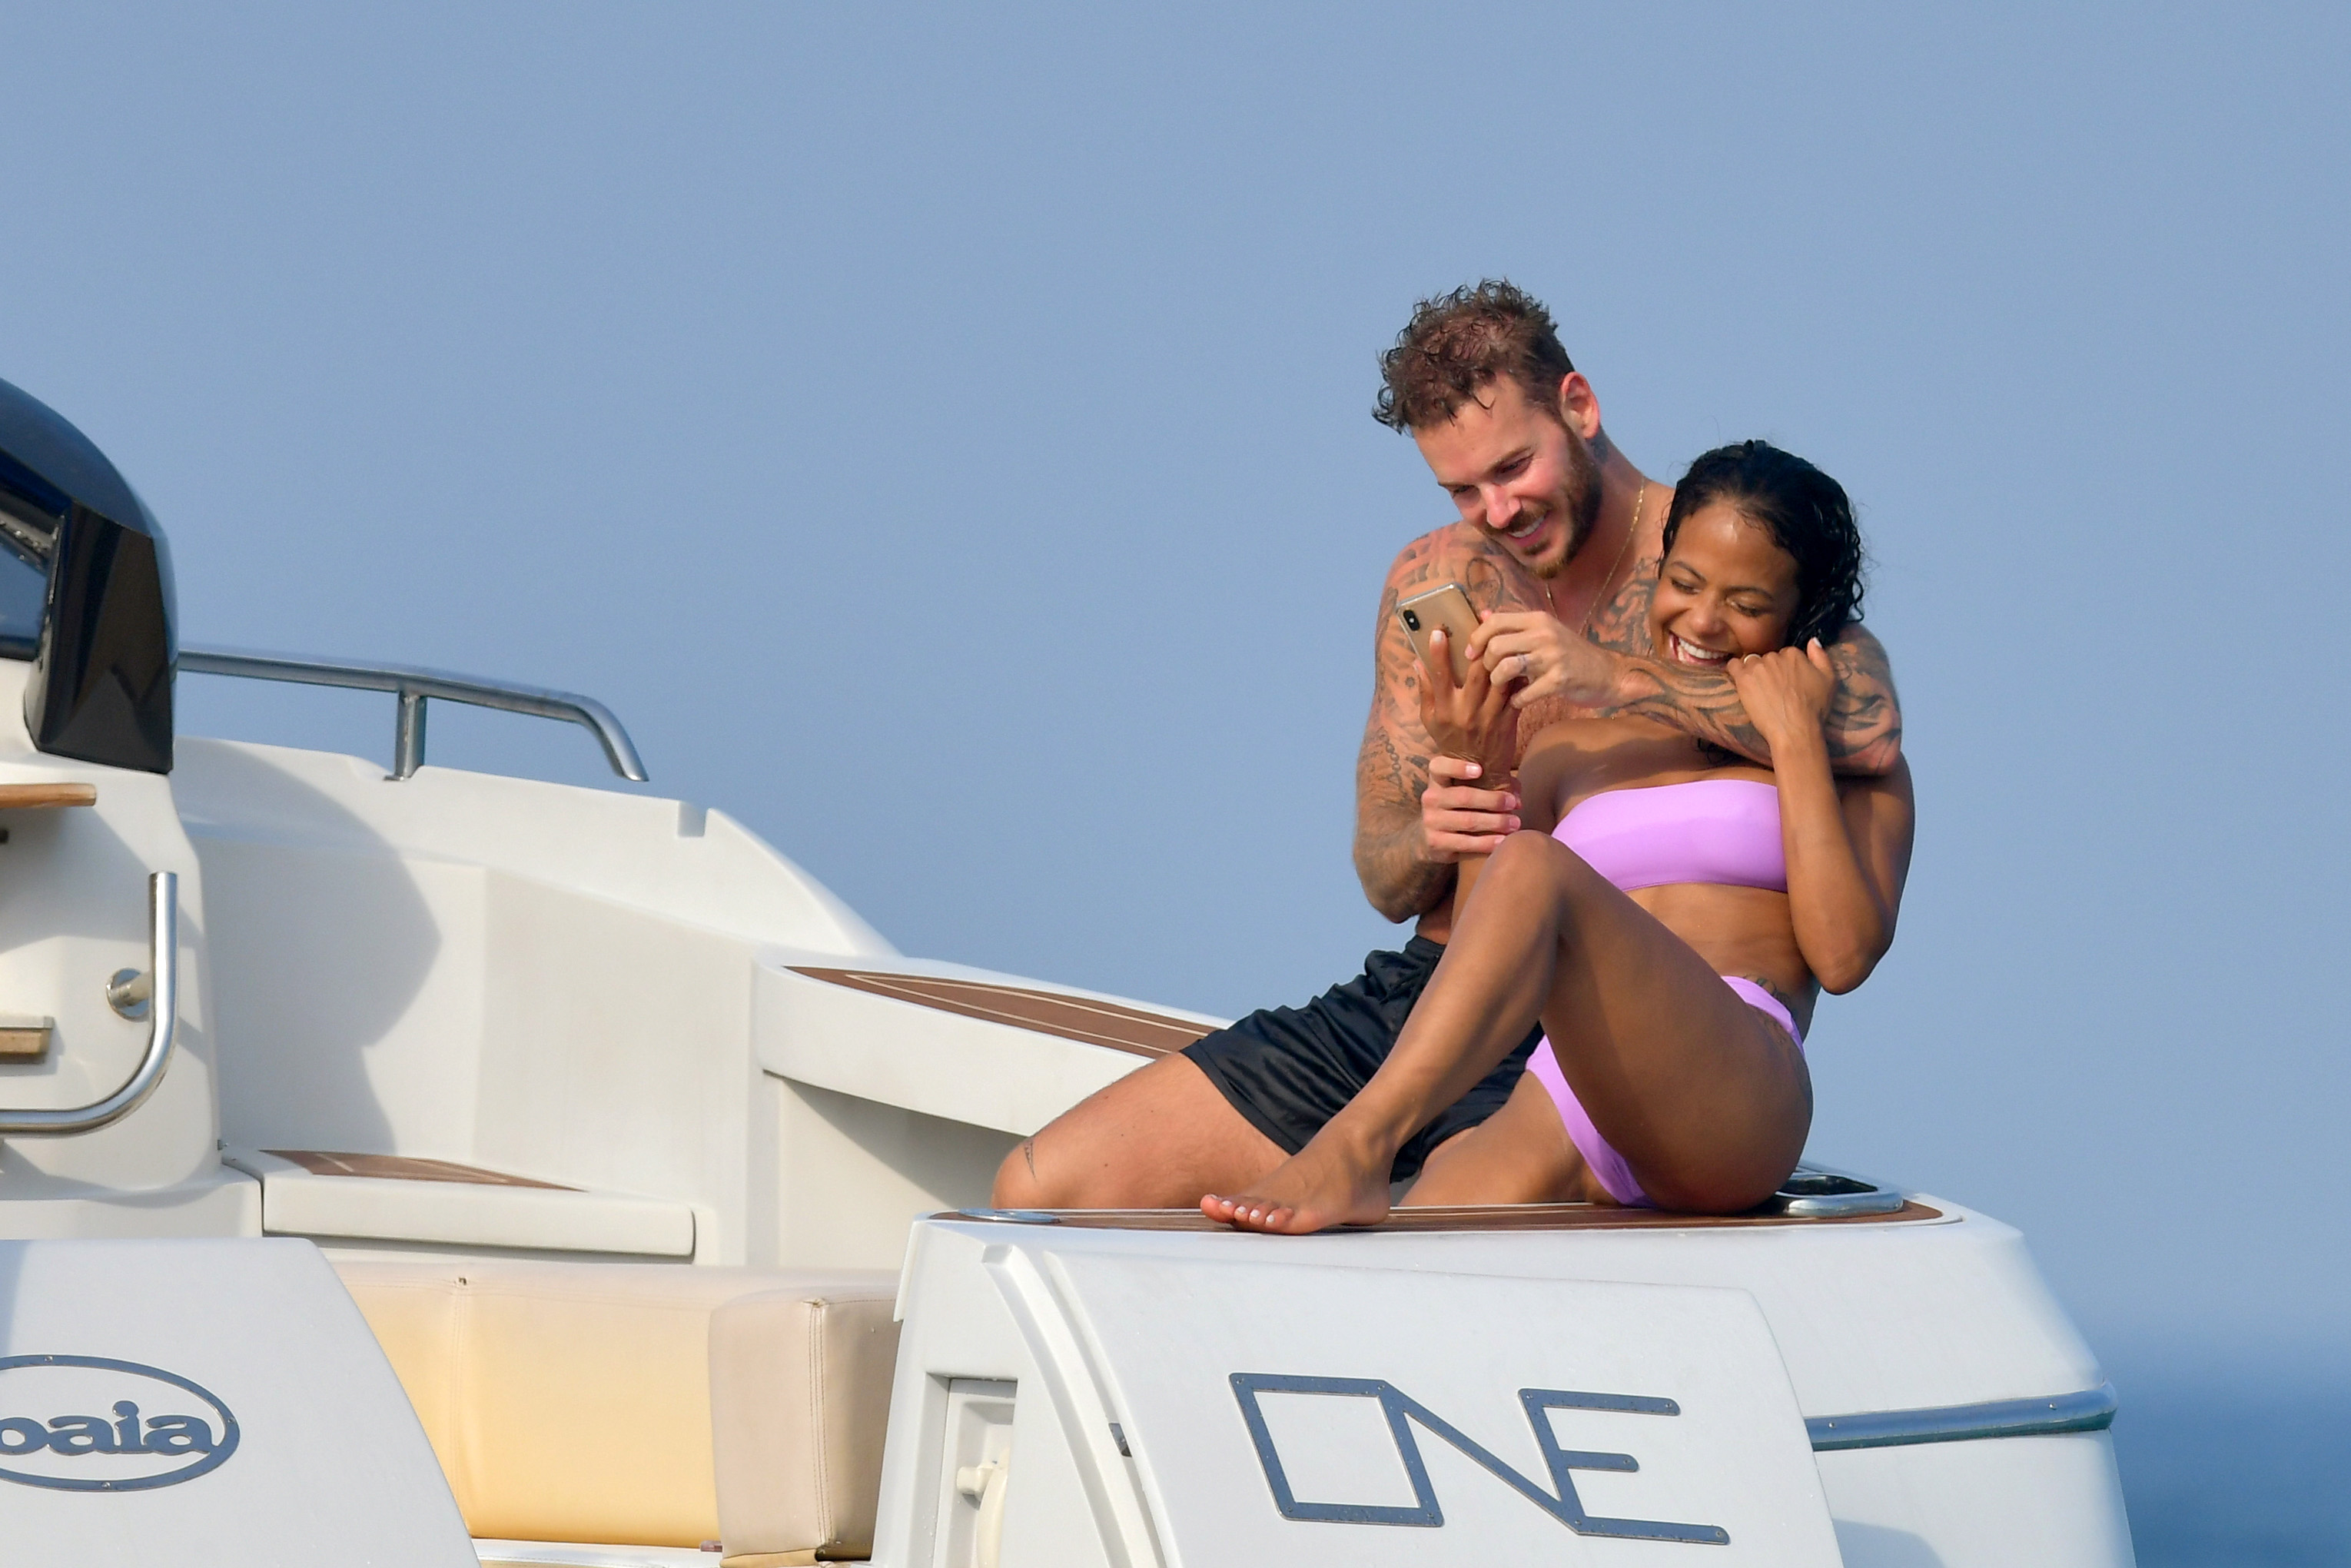 Christina Milian pokies and cameltoe in sexy bikini candids on a boat during holiday UHQ (17).jpg